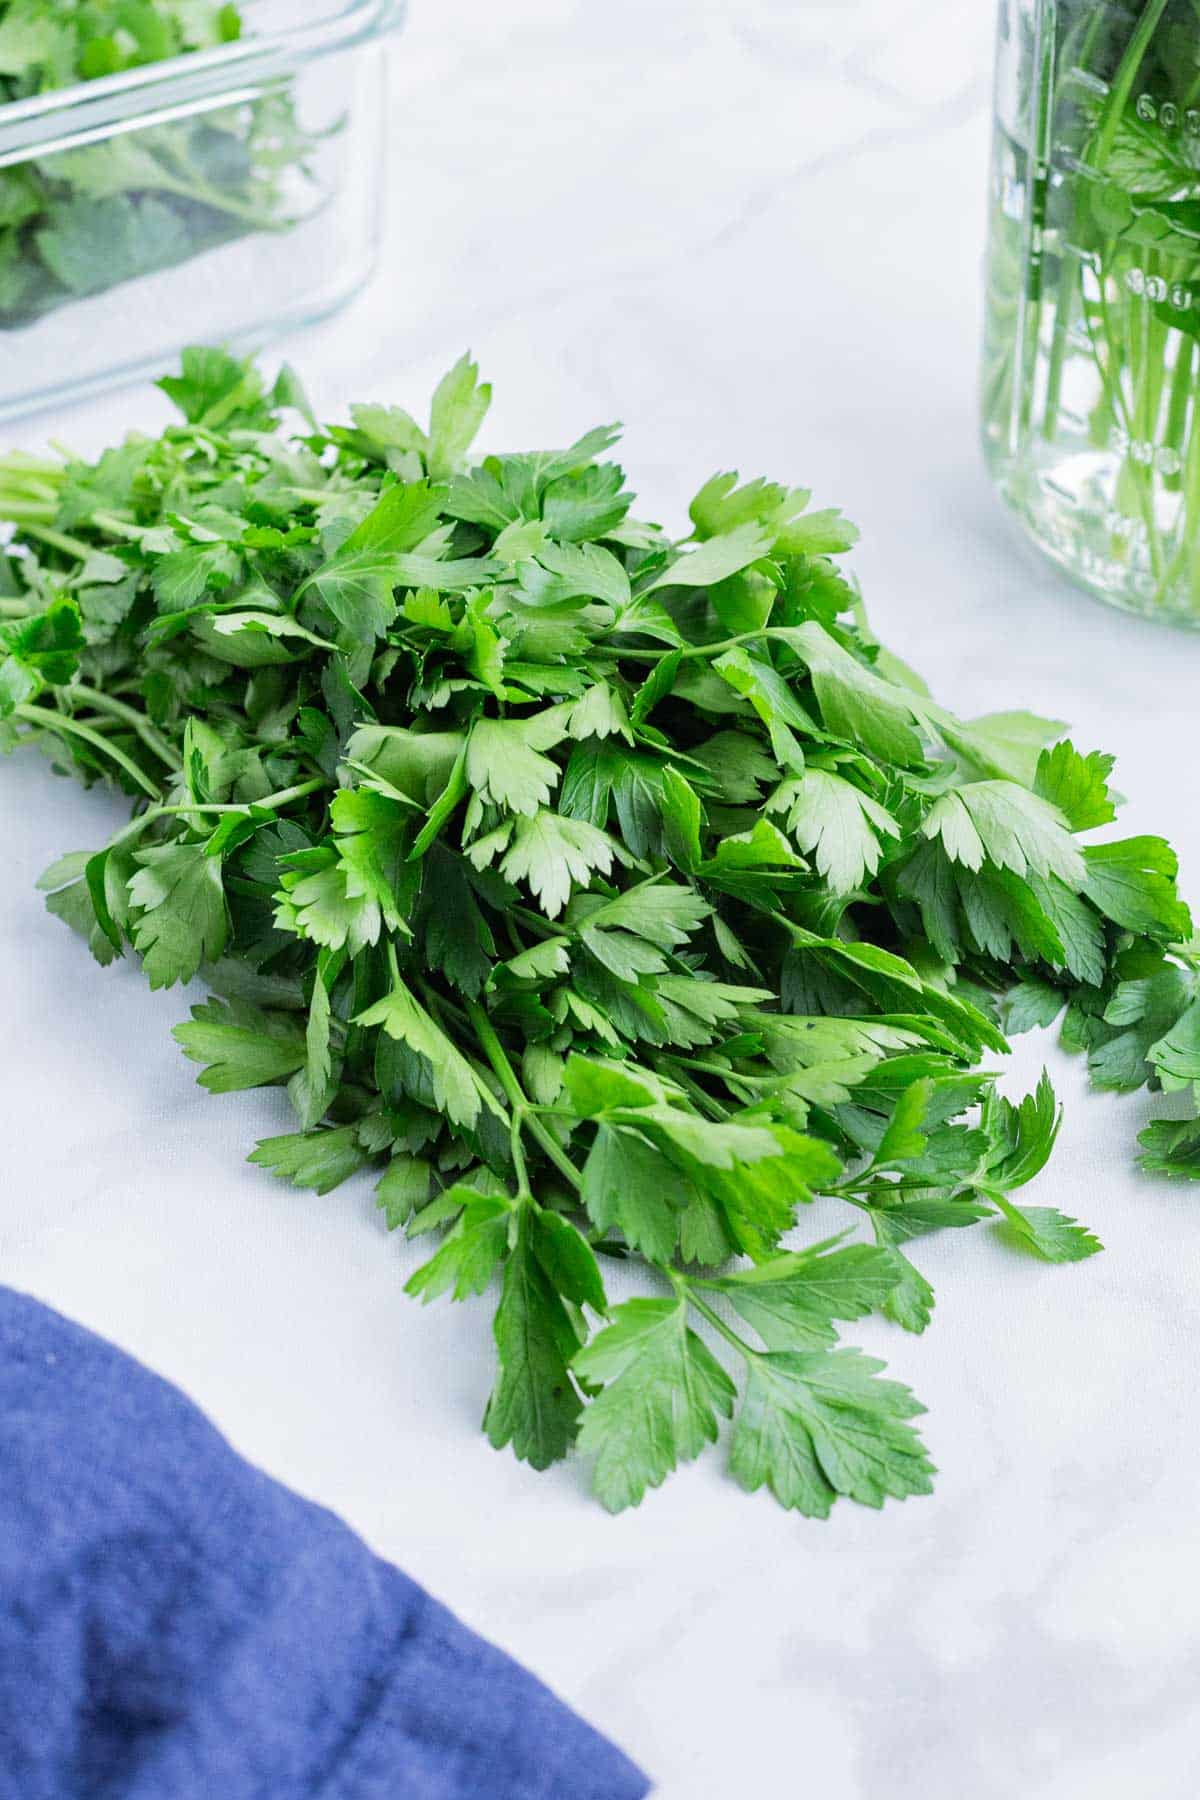 You can easily store parsley in 3 different ways.